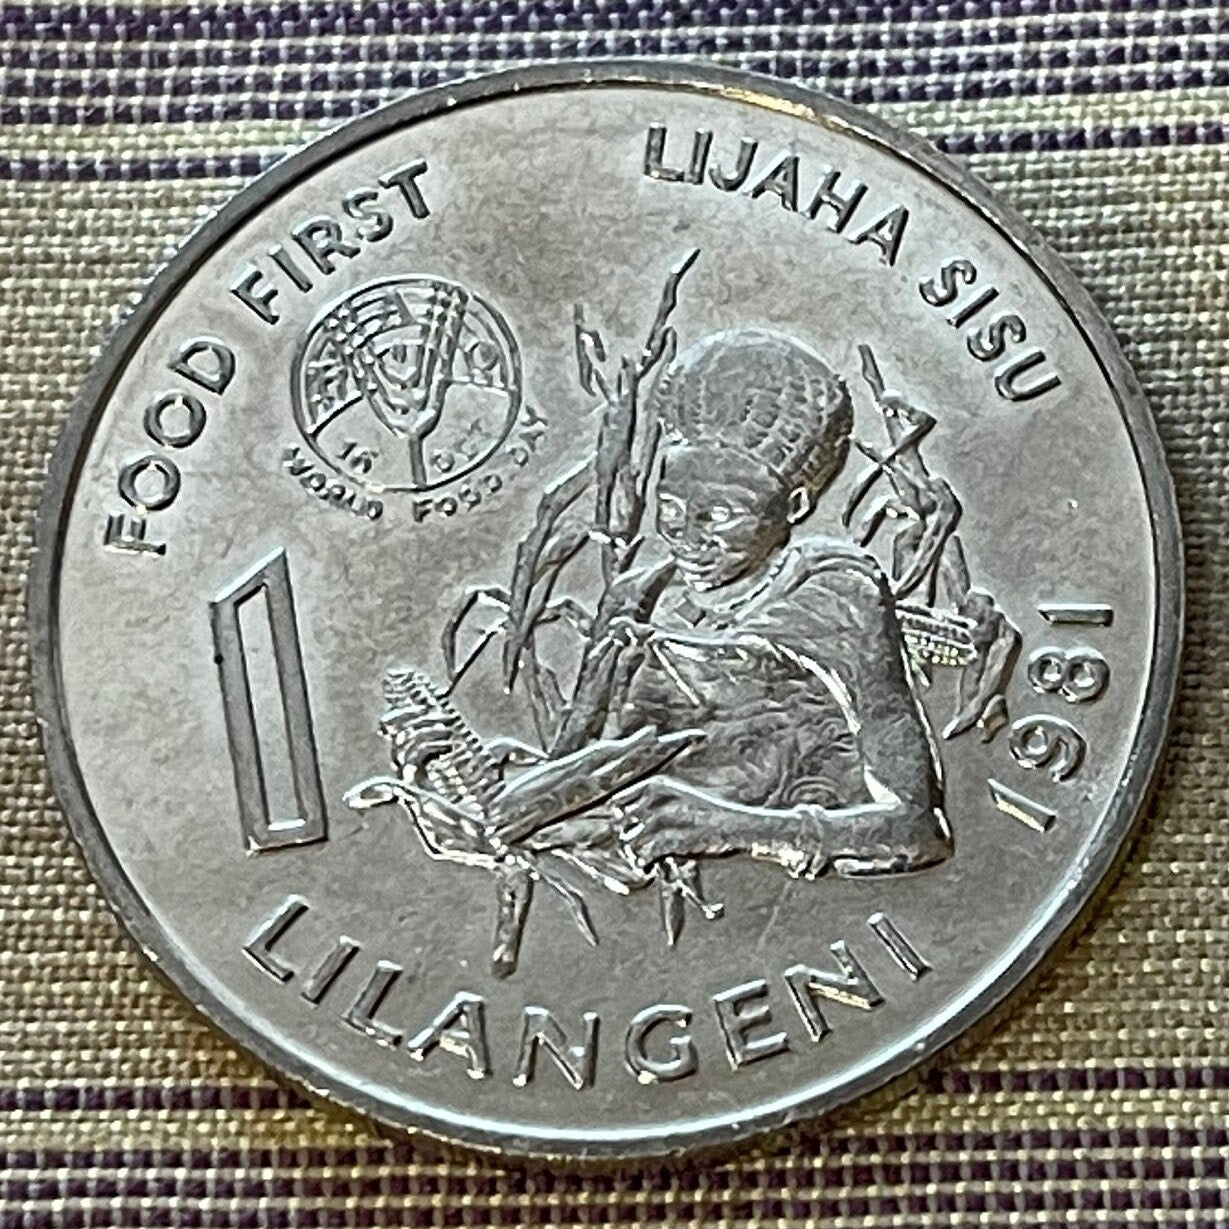 Woman with Beehive Sicolo Hairdo, Husking Corn & King Sobhuza 1 Lilangeni Swaziland Authentic Coin Money for Jewelry (1981) (Eswatini) Maize